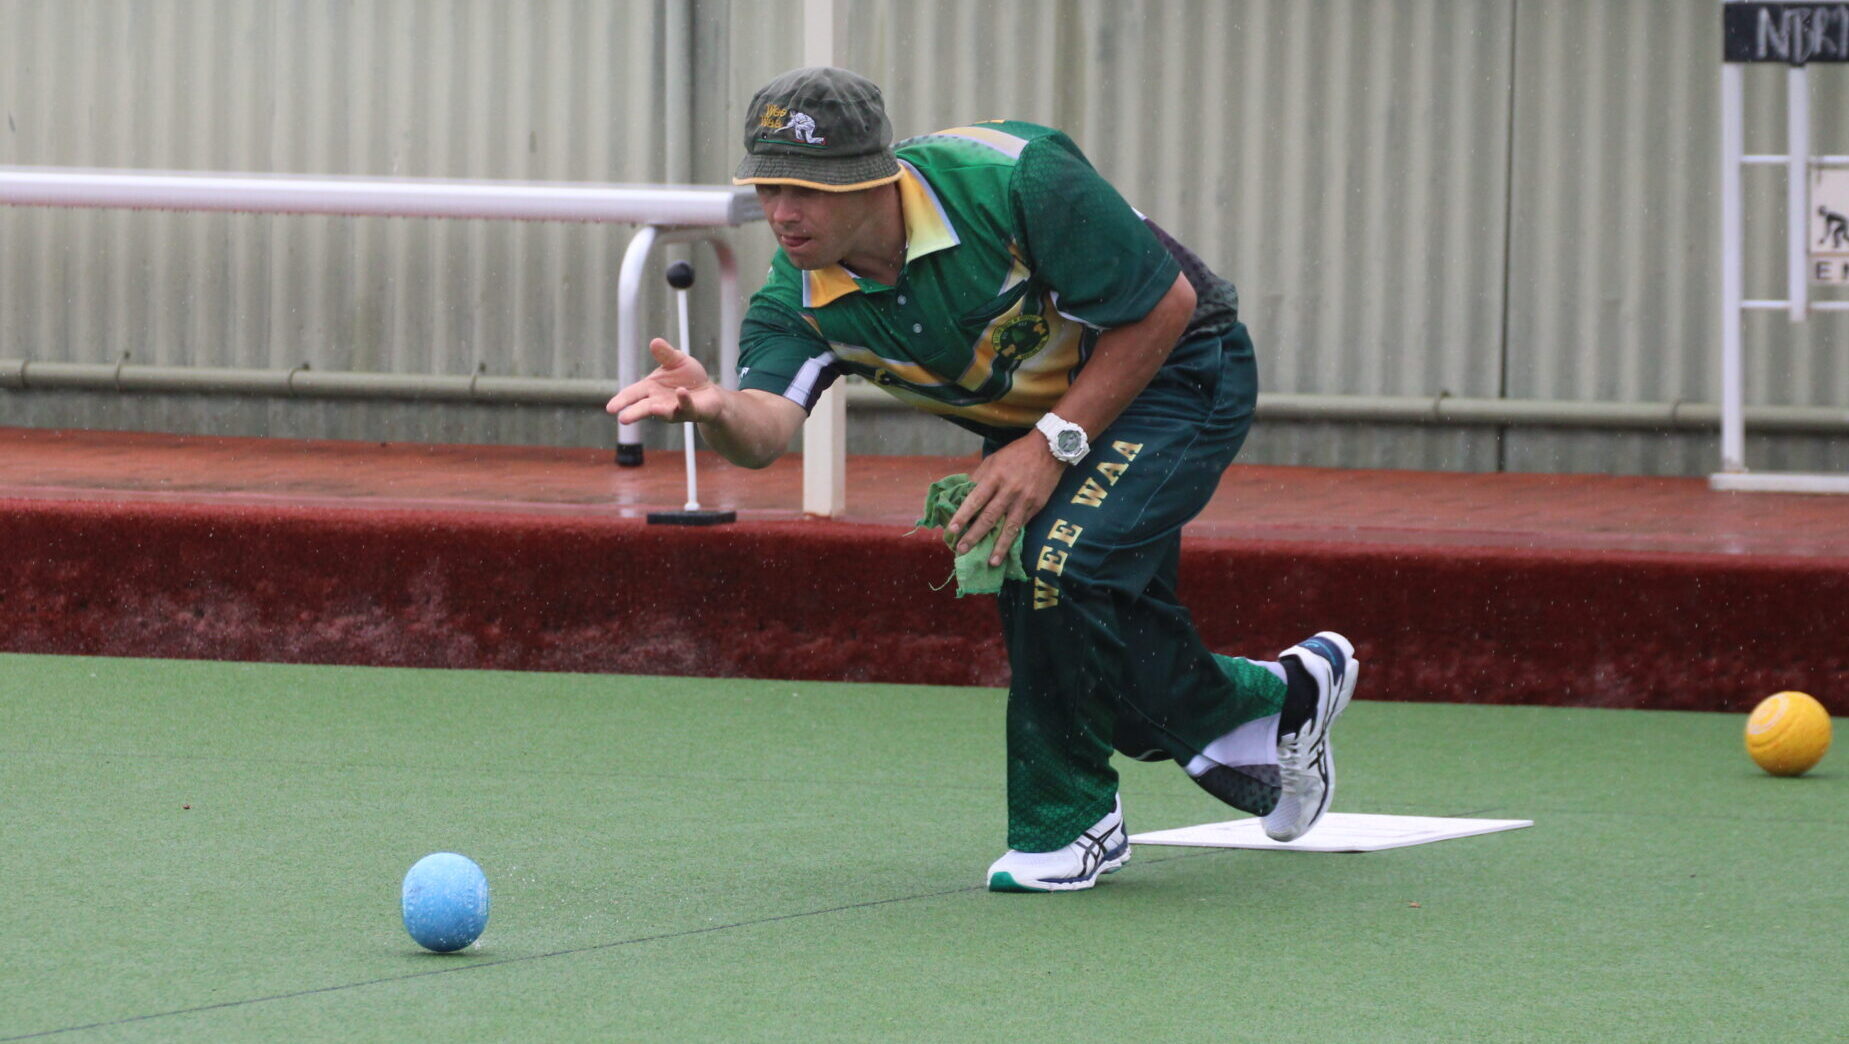 Wee Waa bowlers compete at the Zone 3 Triples finals hosted by Lightning Ridge